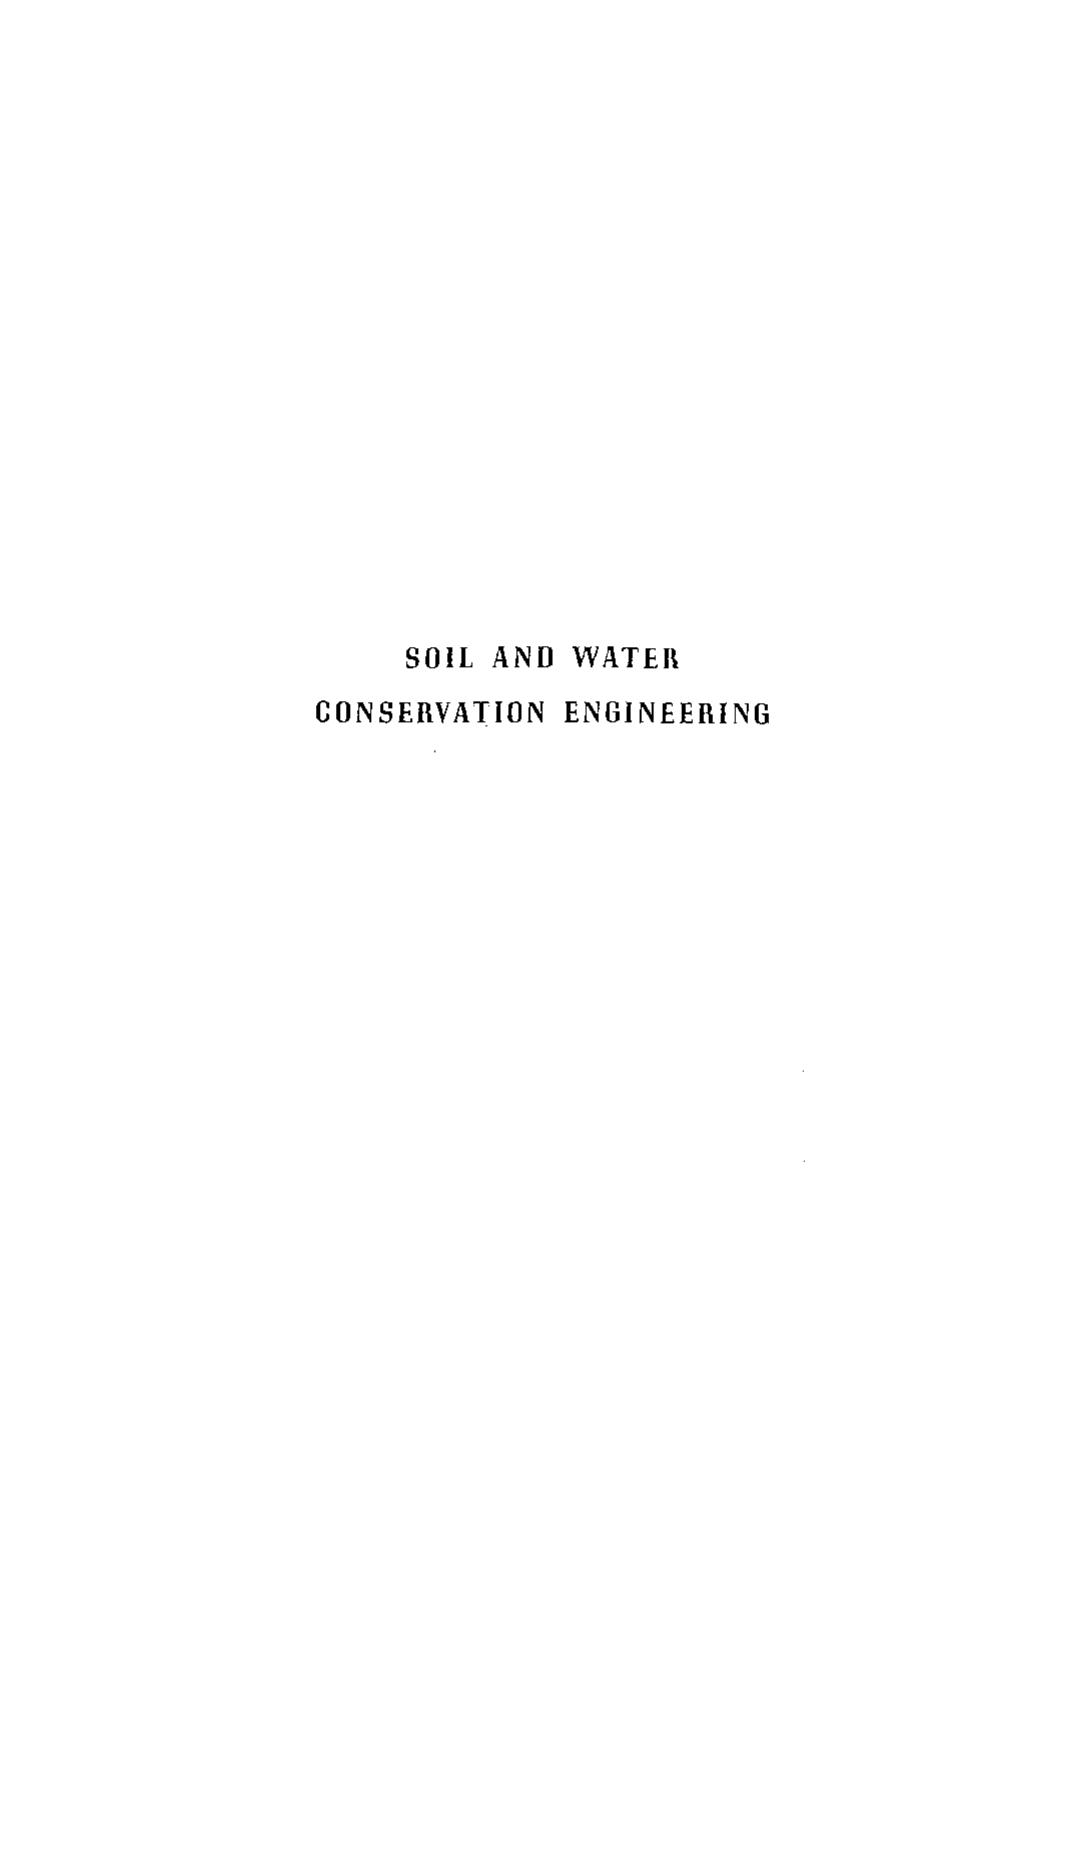 soil and water conservation engineering ( PDFDrive.com )